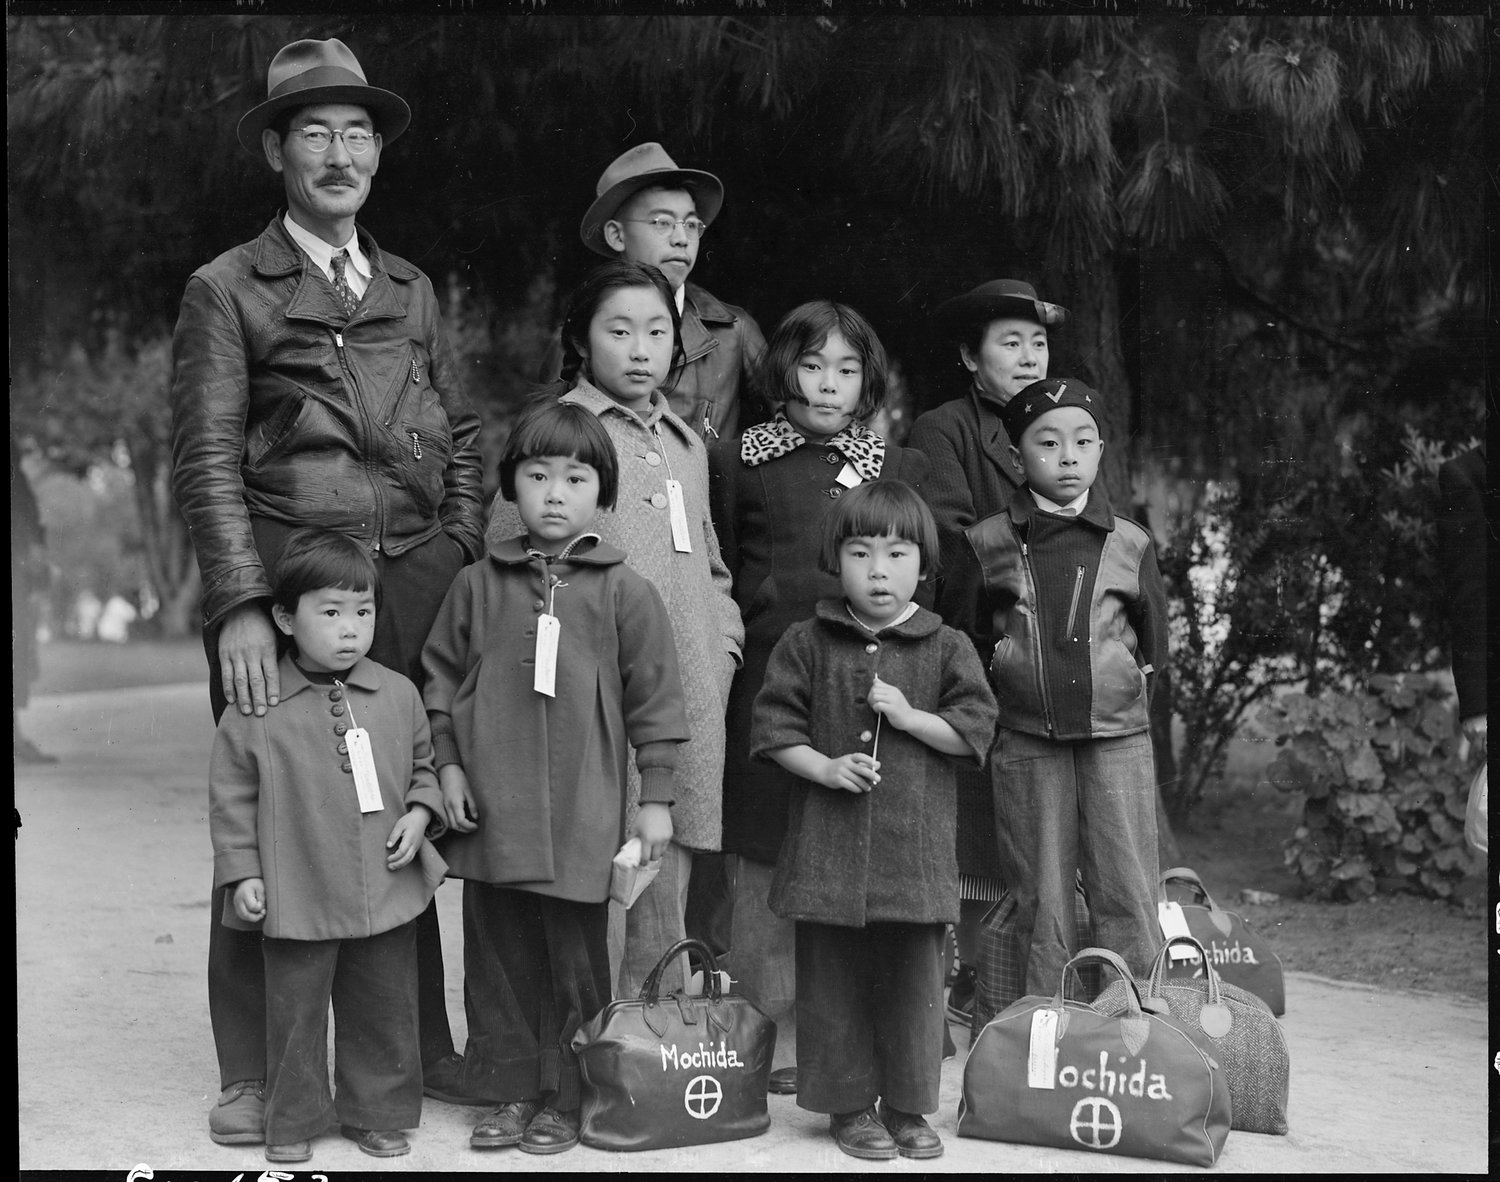  A Japanese American family with their luggage and ID tags  via  